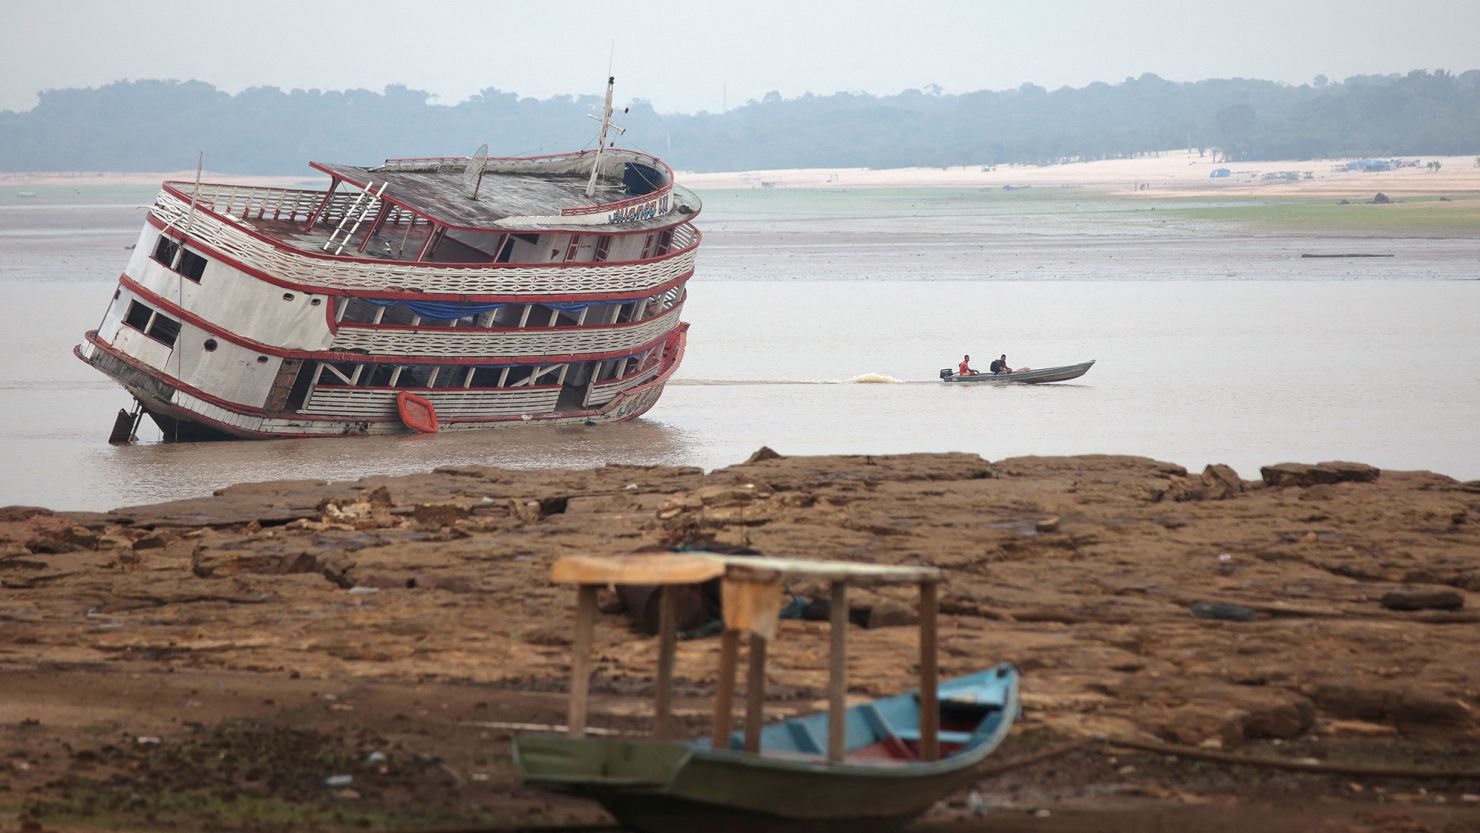 Boats stranded at David's Marina on the Rio Negro, Manaus, Brazil on Oct 16, 2023. River water levels hit their lowest point in at least 121 years.